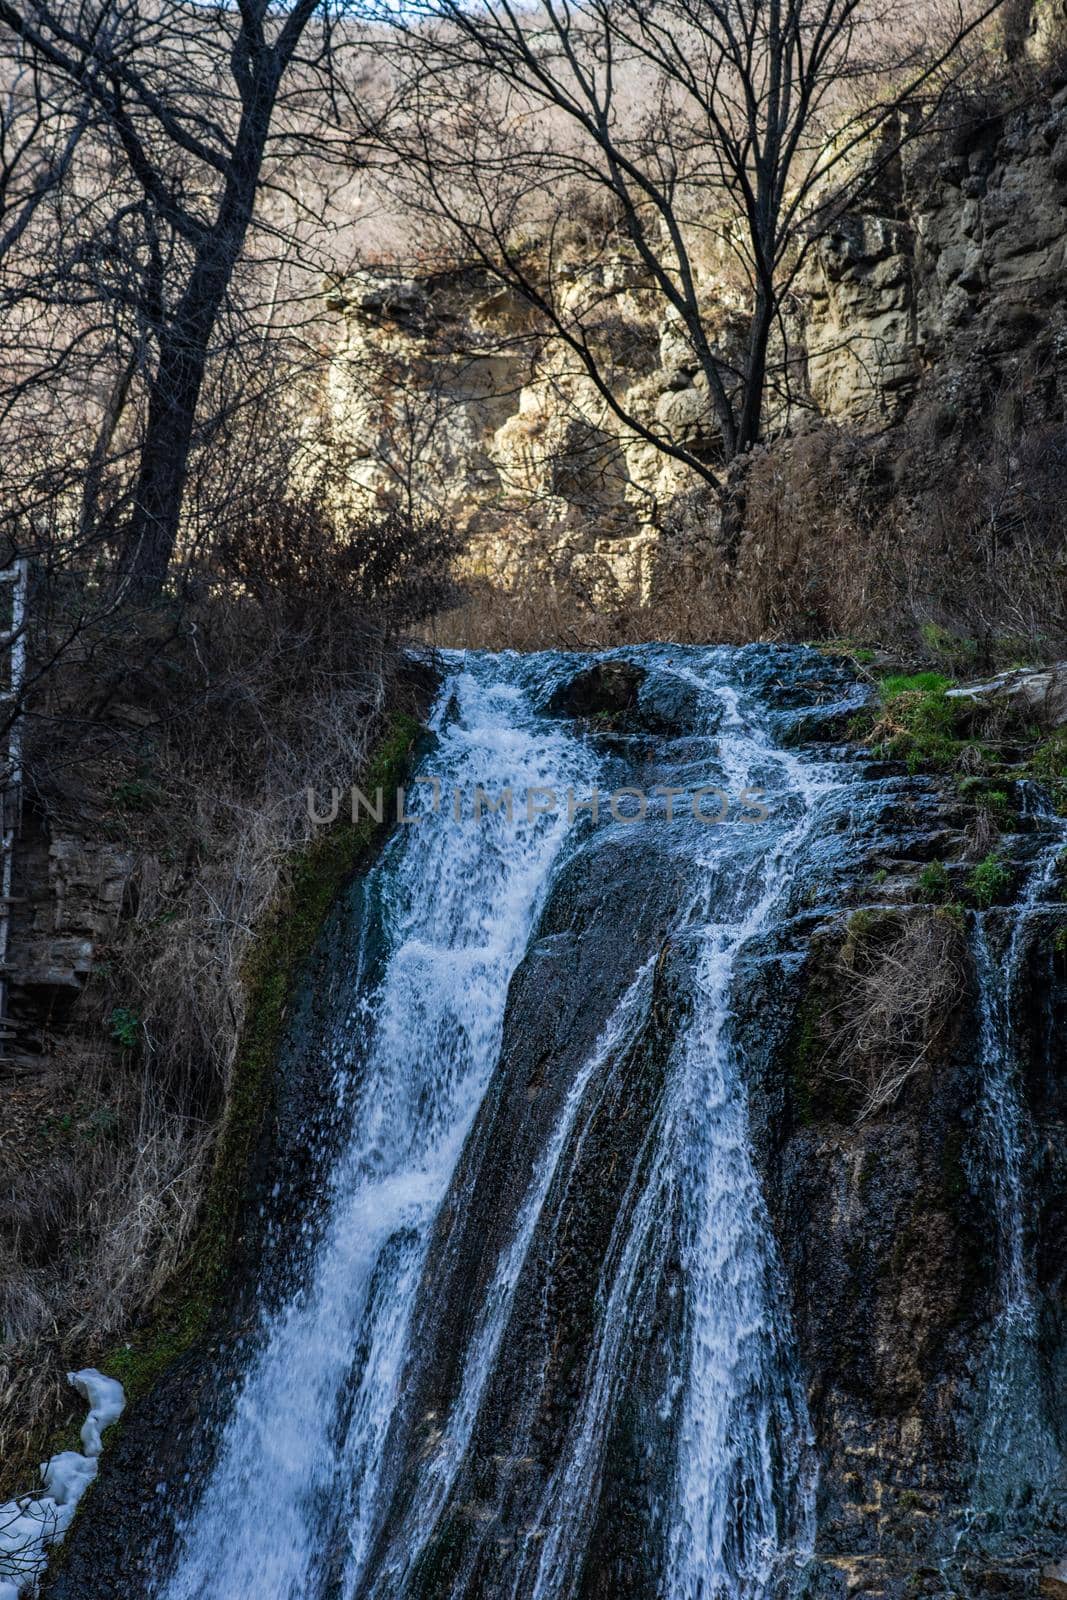 Waterfall in Tbilisi wild area by Elet